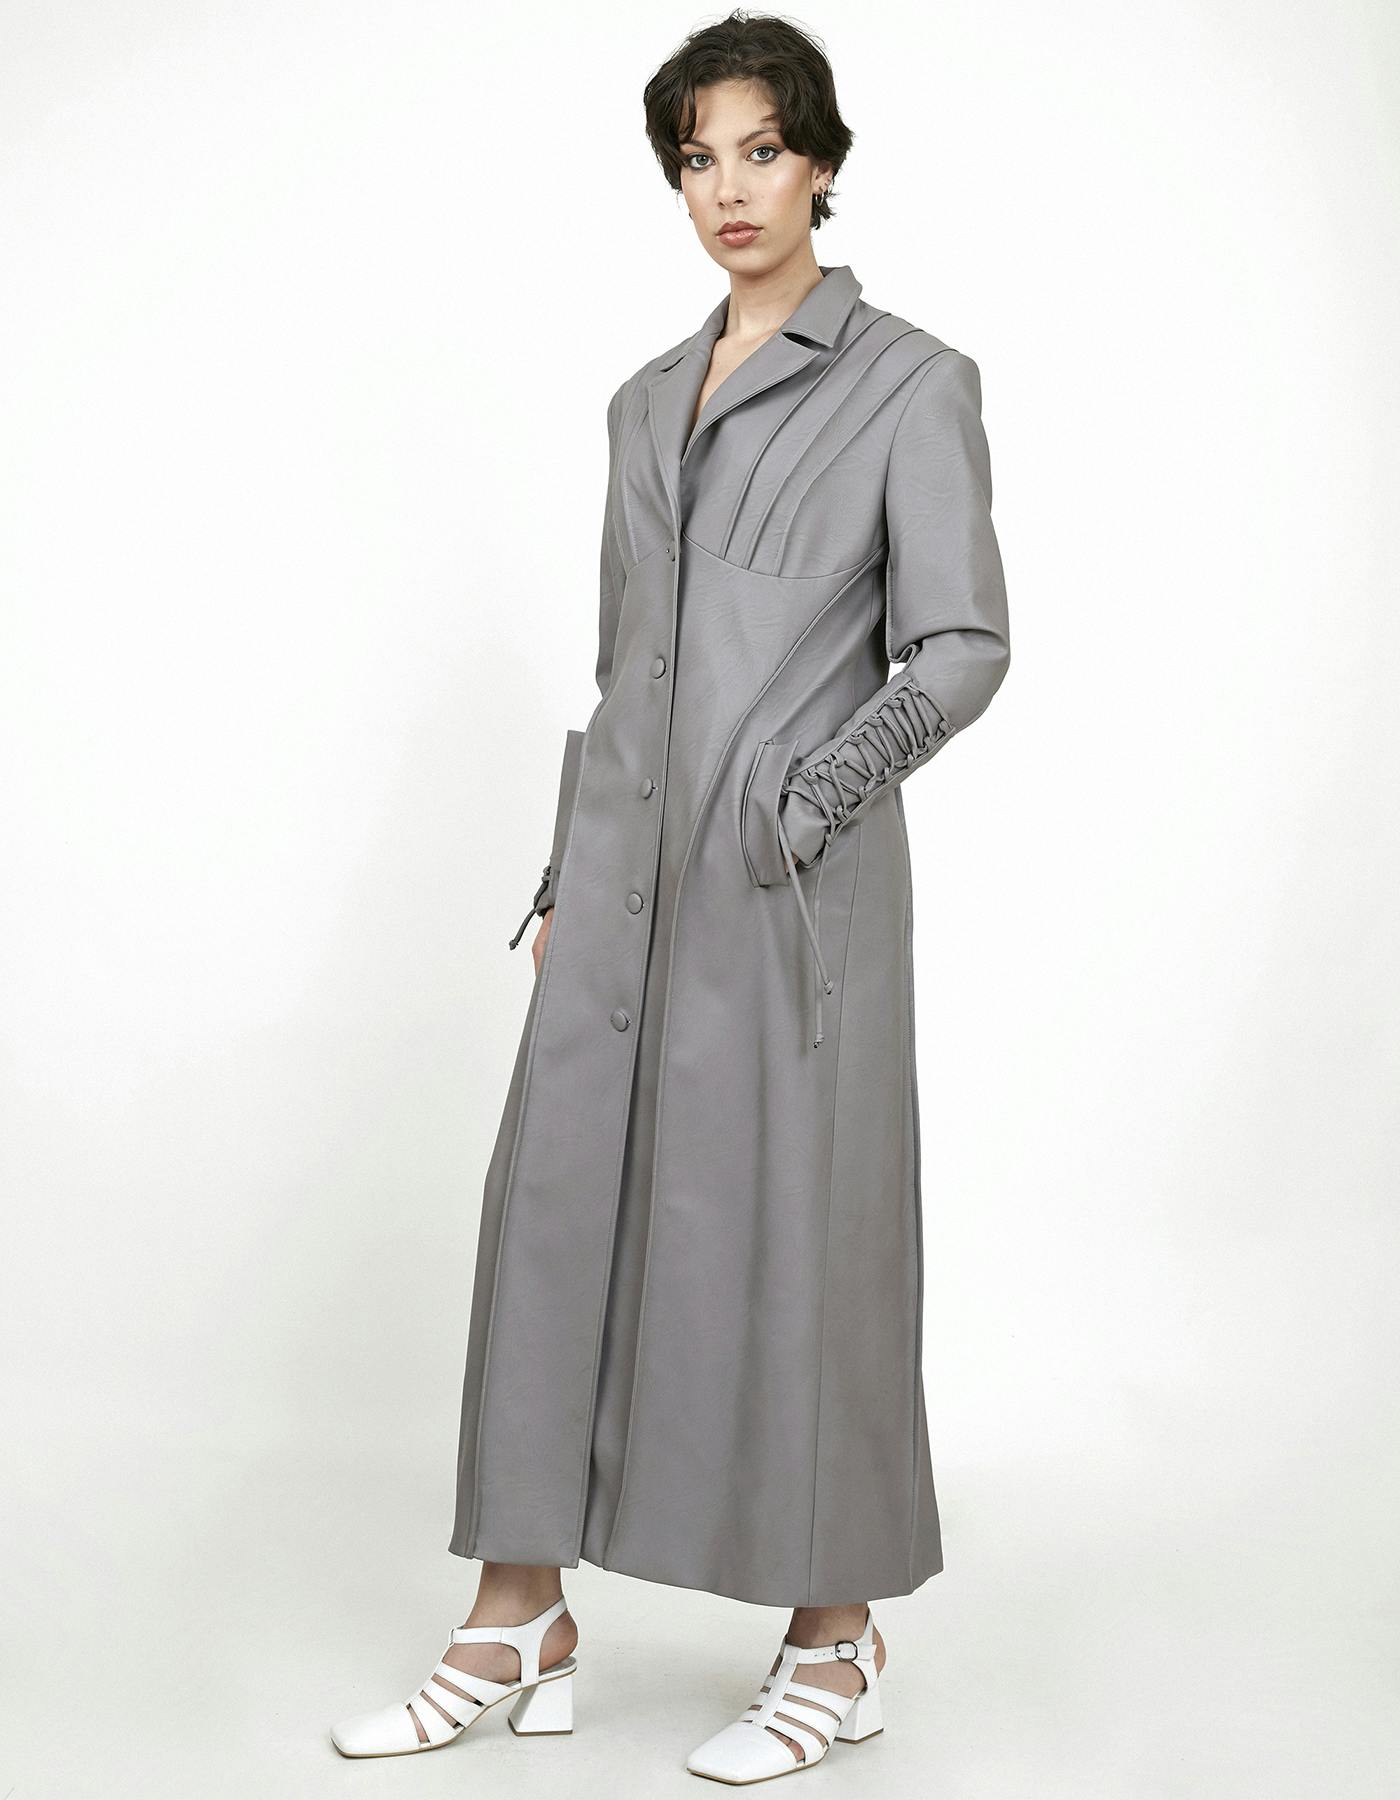 GRAY FAUX LEATHER TRENCH COAT, a product by BLIKVANGER